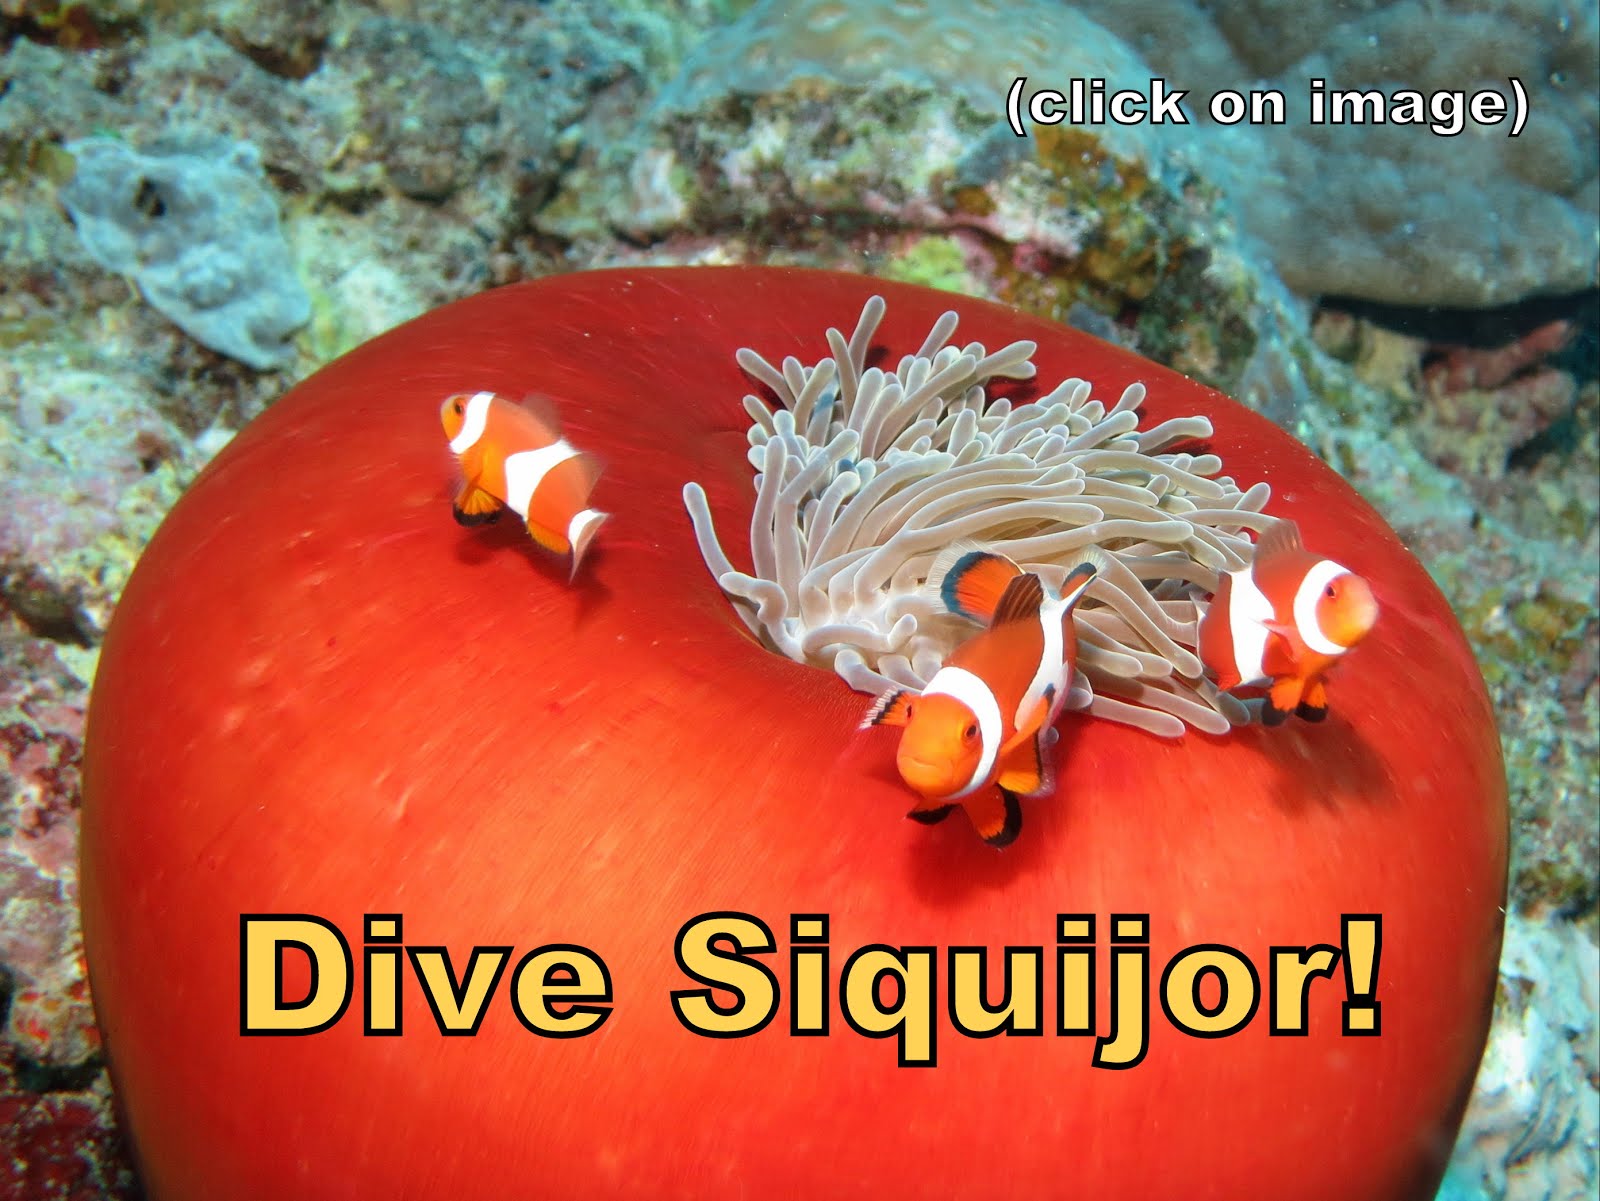 Dive Siquijor - click on image for details